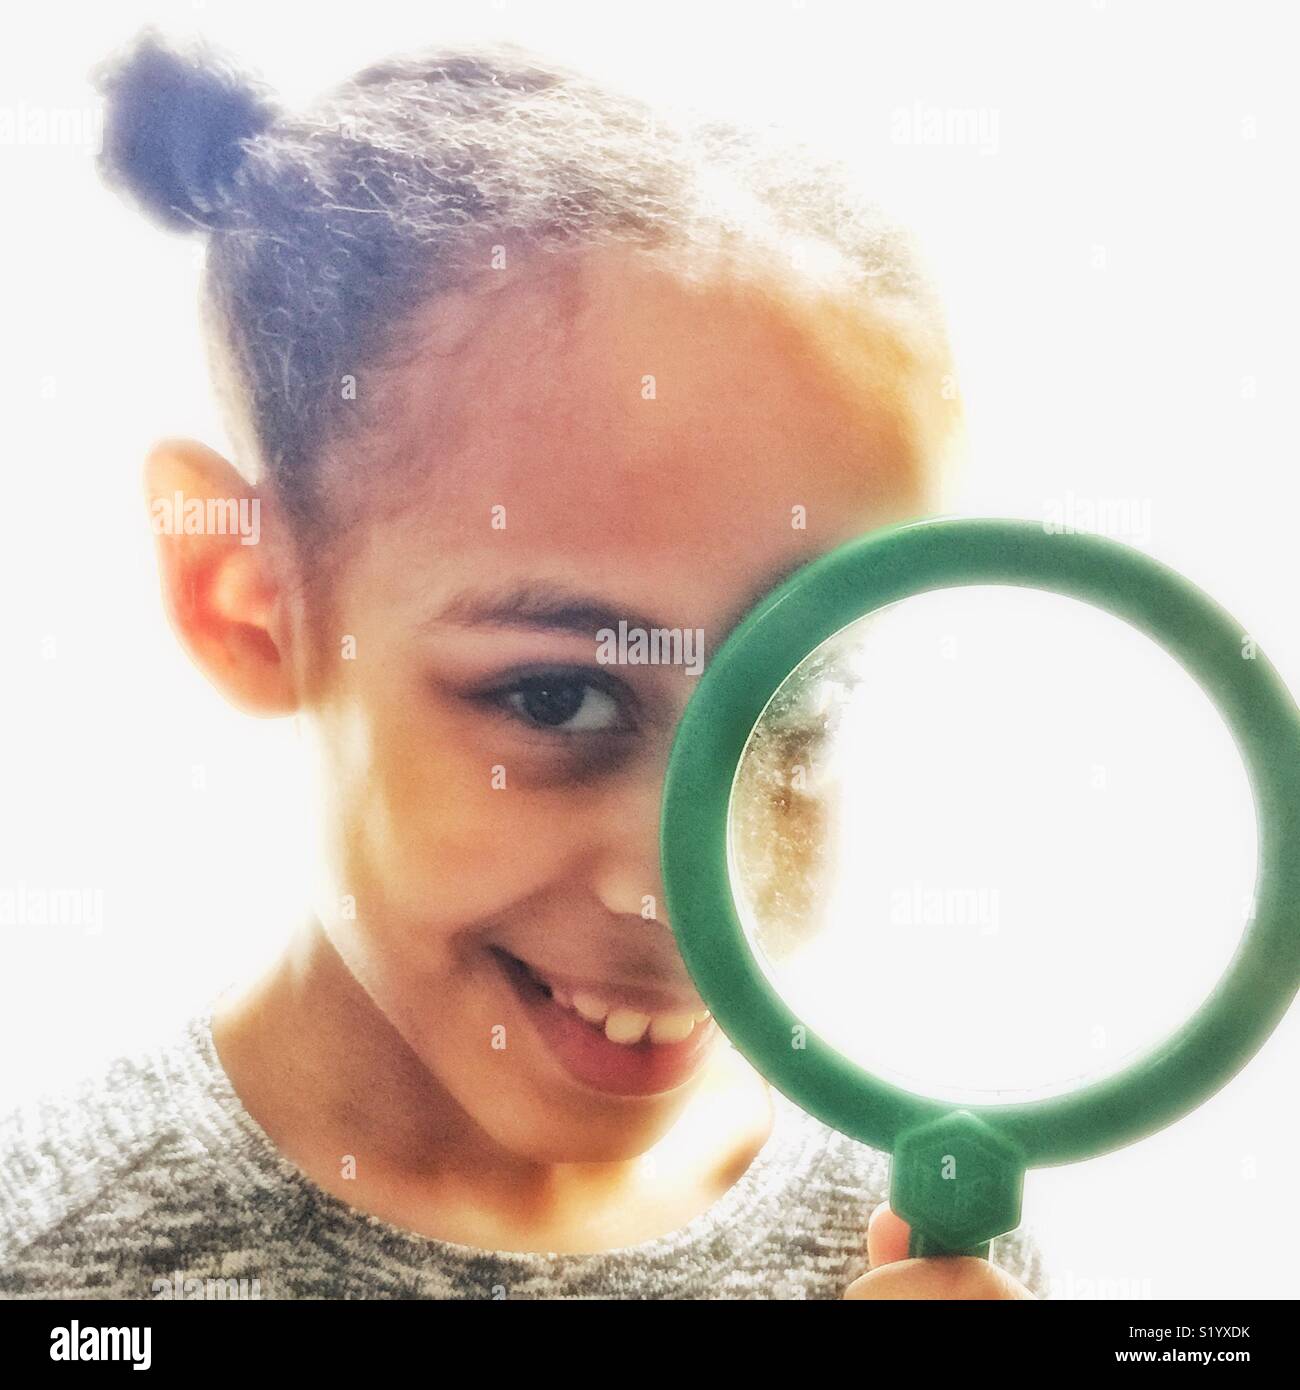 A young girl looks through a magnifying glass. Stock Photo